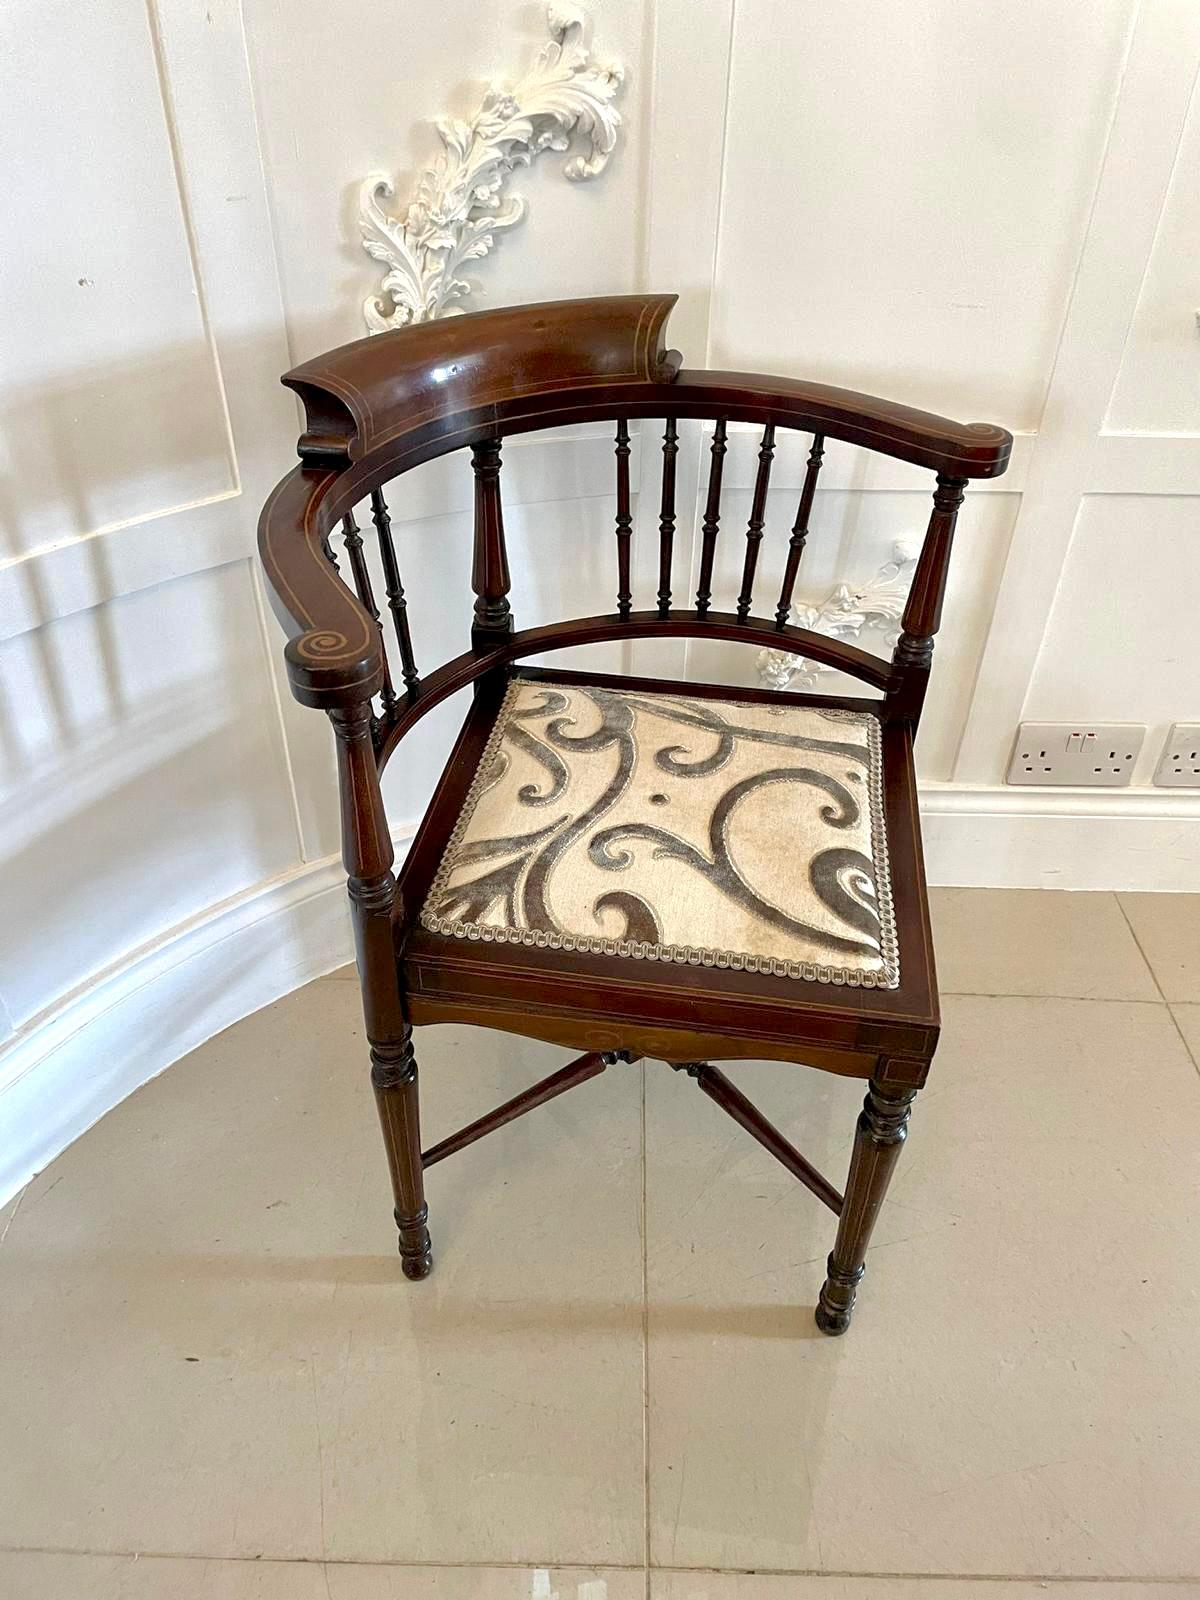 Quality Edwardian mahogany inlaid corner chair having a lovely quality shaped back with attractive satinwood inlay, newly recovered seat and standing on turned tapering legs united by a turned cross stretcher

A charming chair boasting a